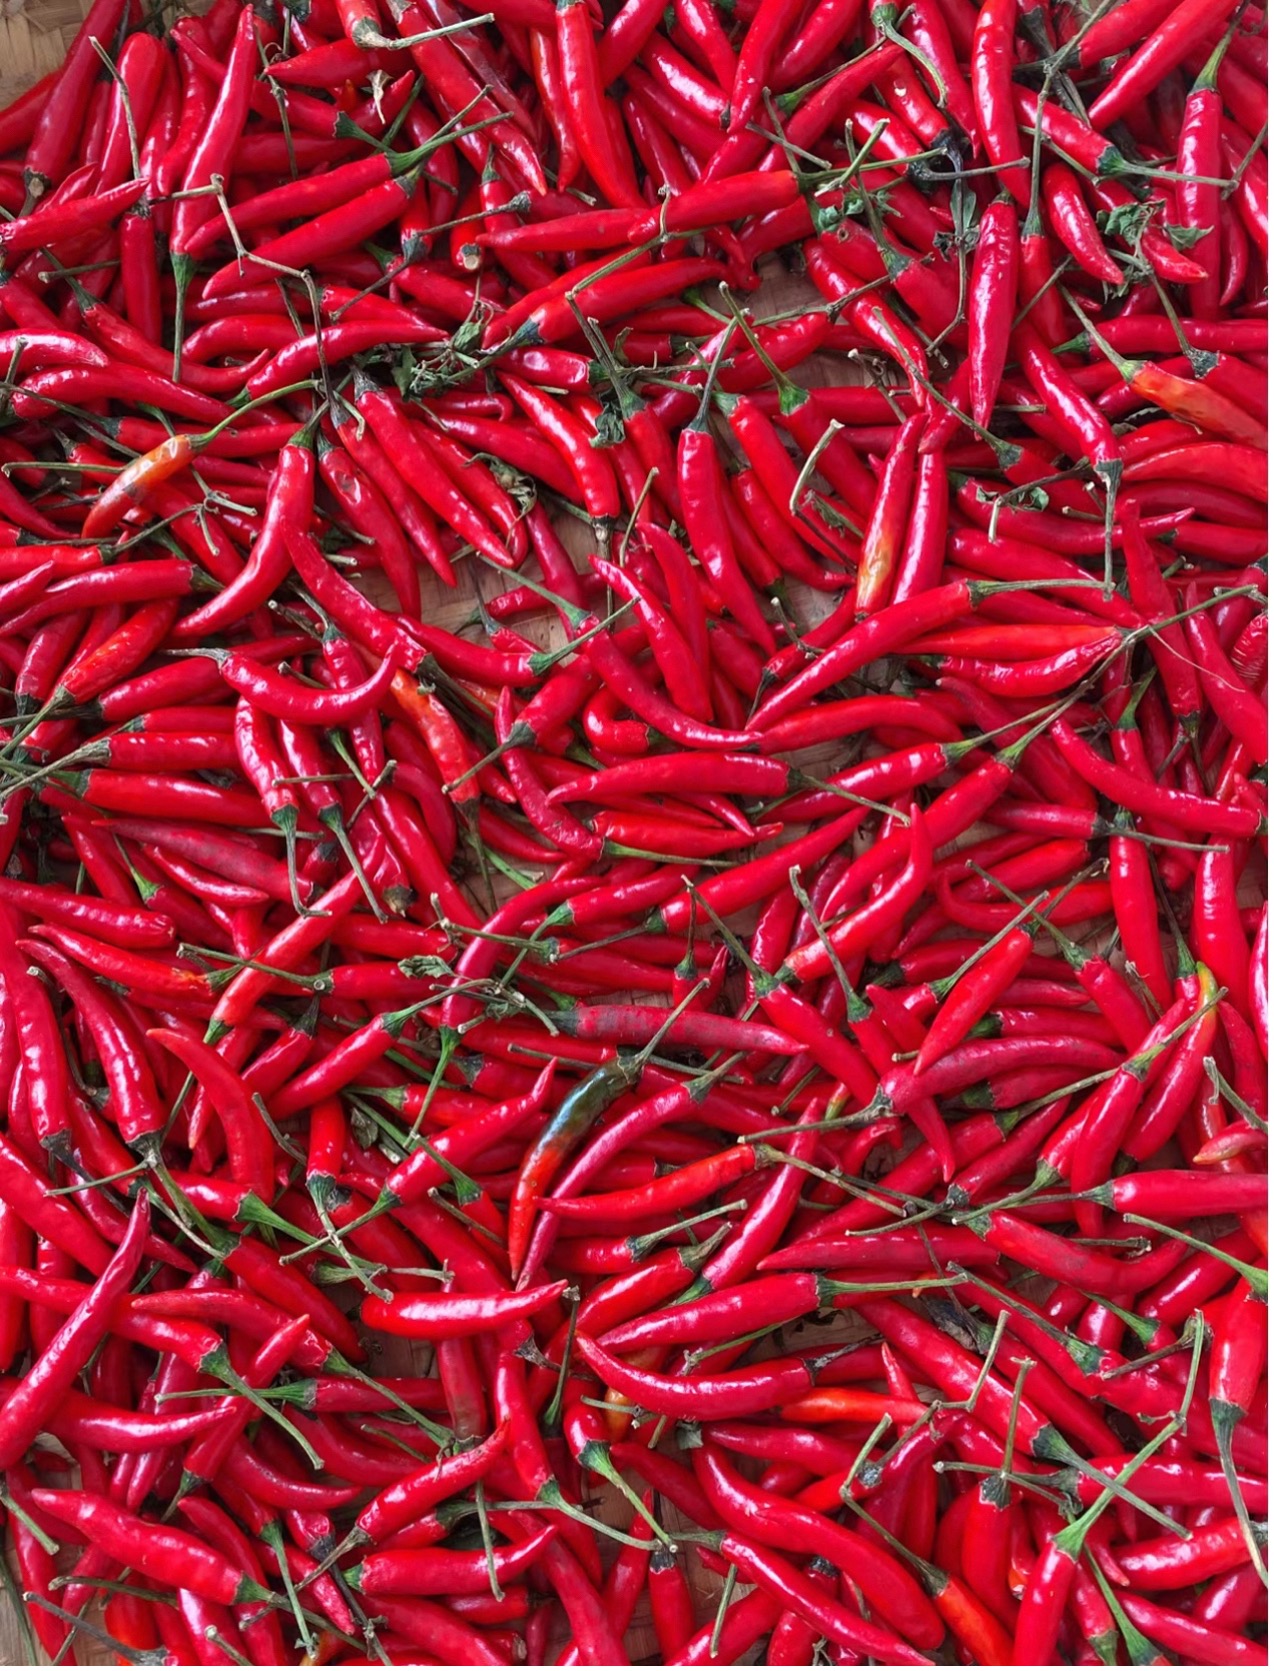 Red chili peppers harvested in Wenchang, Hainan Province /Photo provided to CGTN